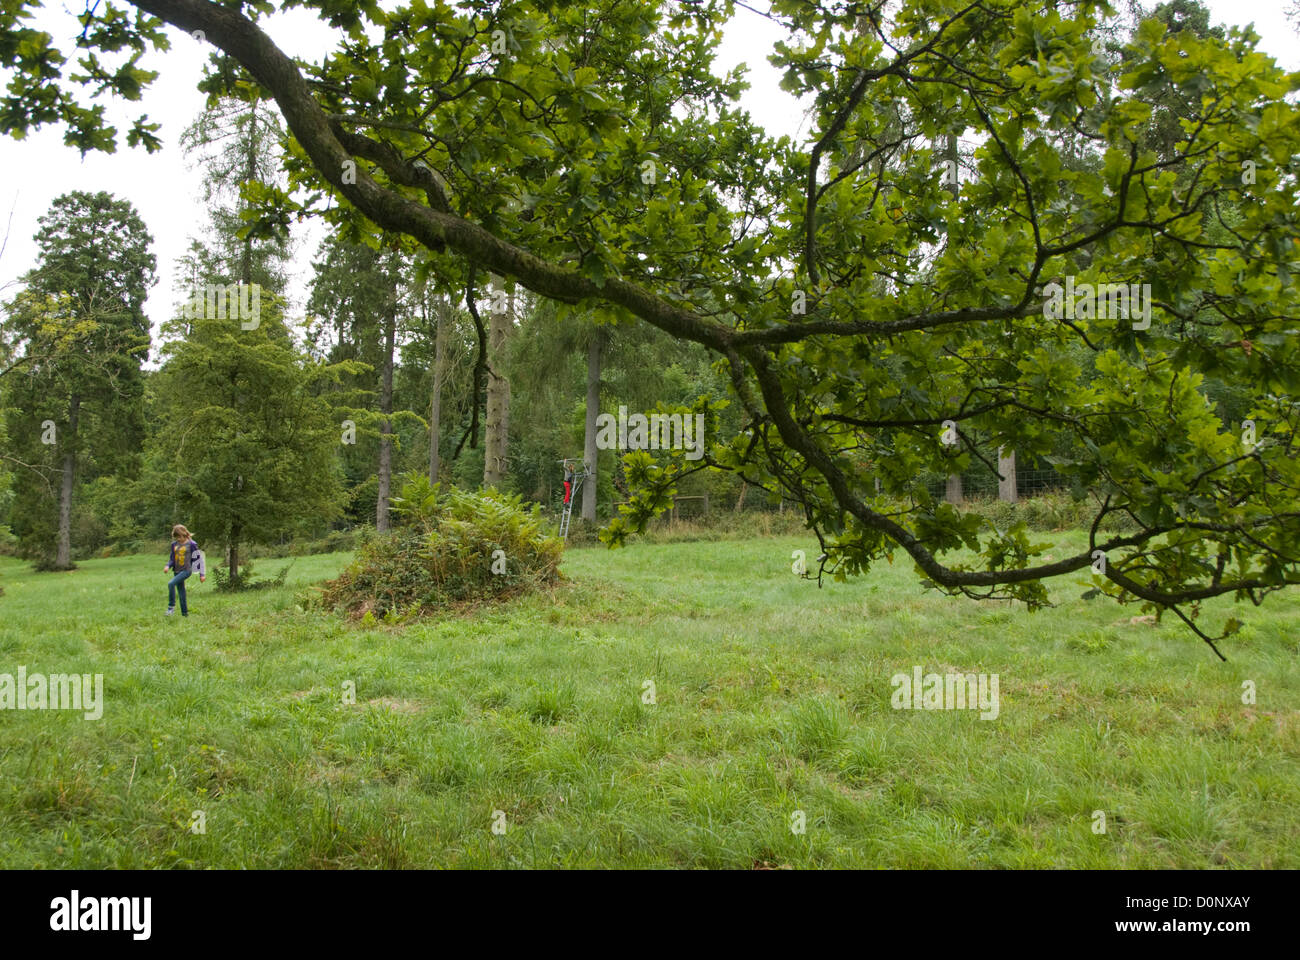 English landscape with a forest and children playing in the background Stock Photo